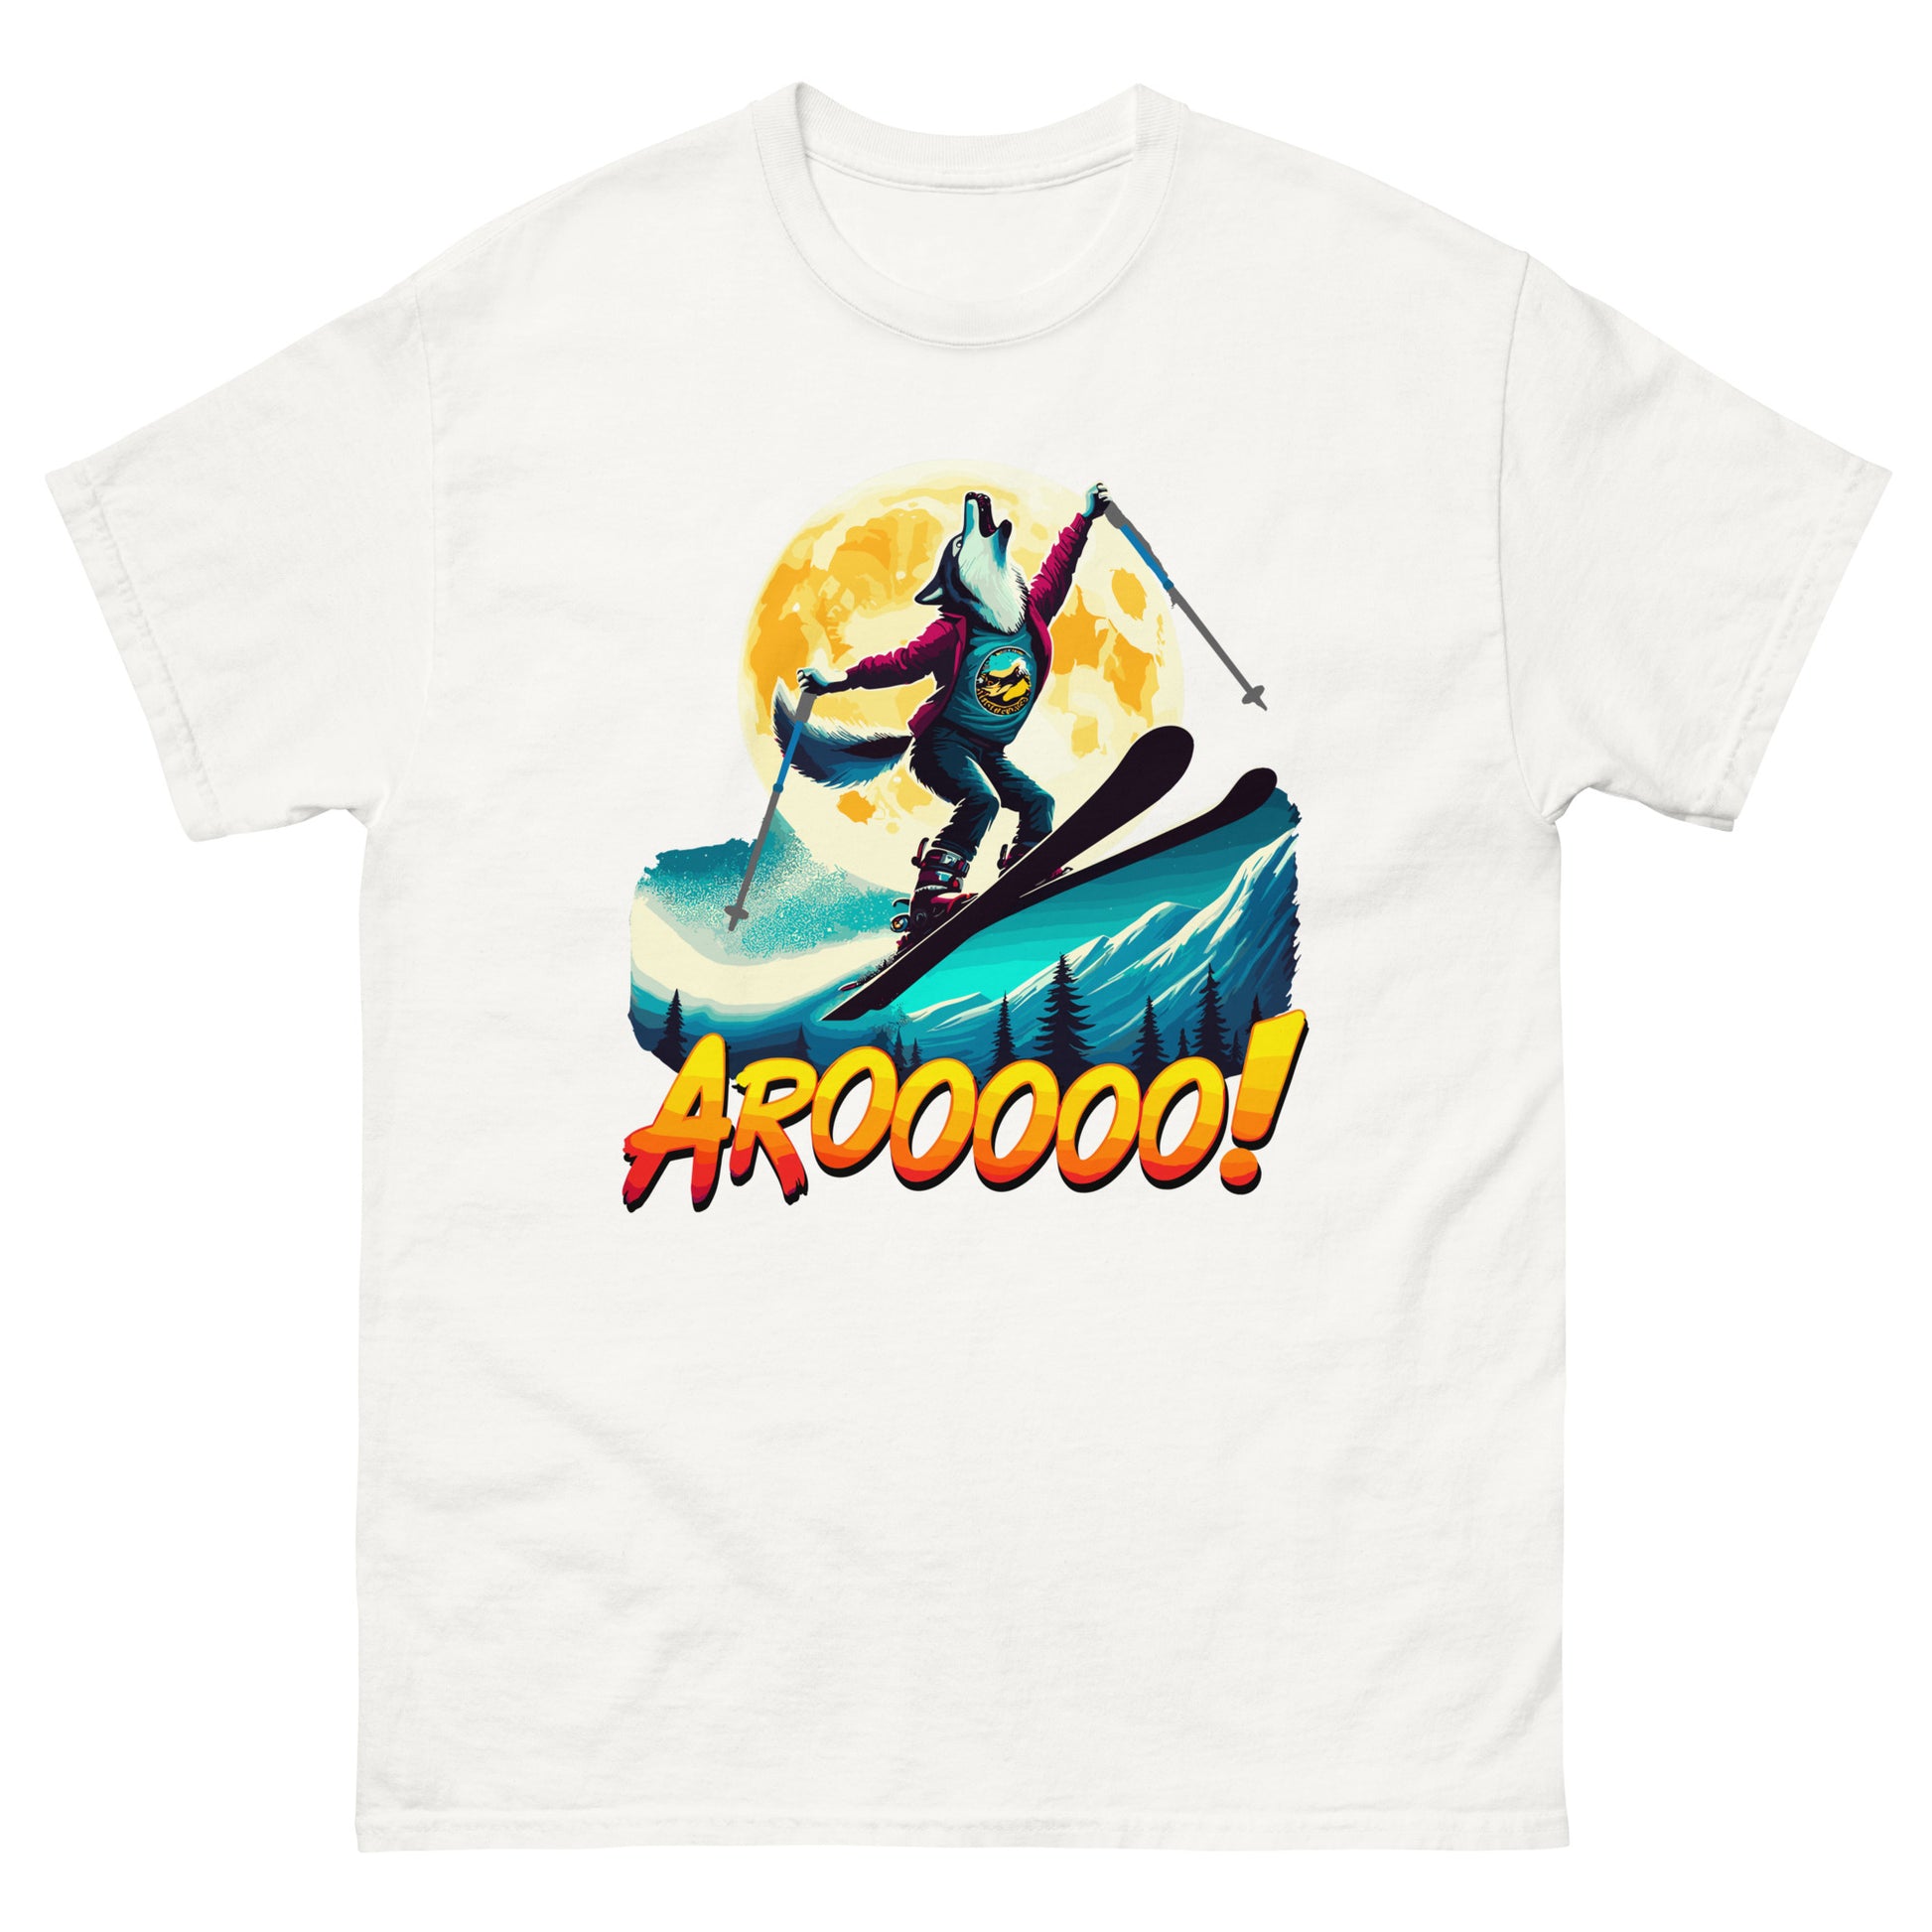 AROOO! Wolf doing a ski jump in front of a full moon printed on a T-shirt by Whistler Shirts